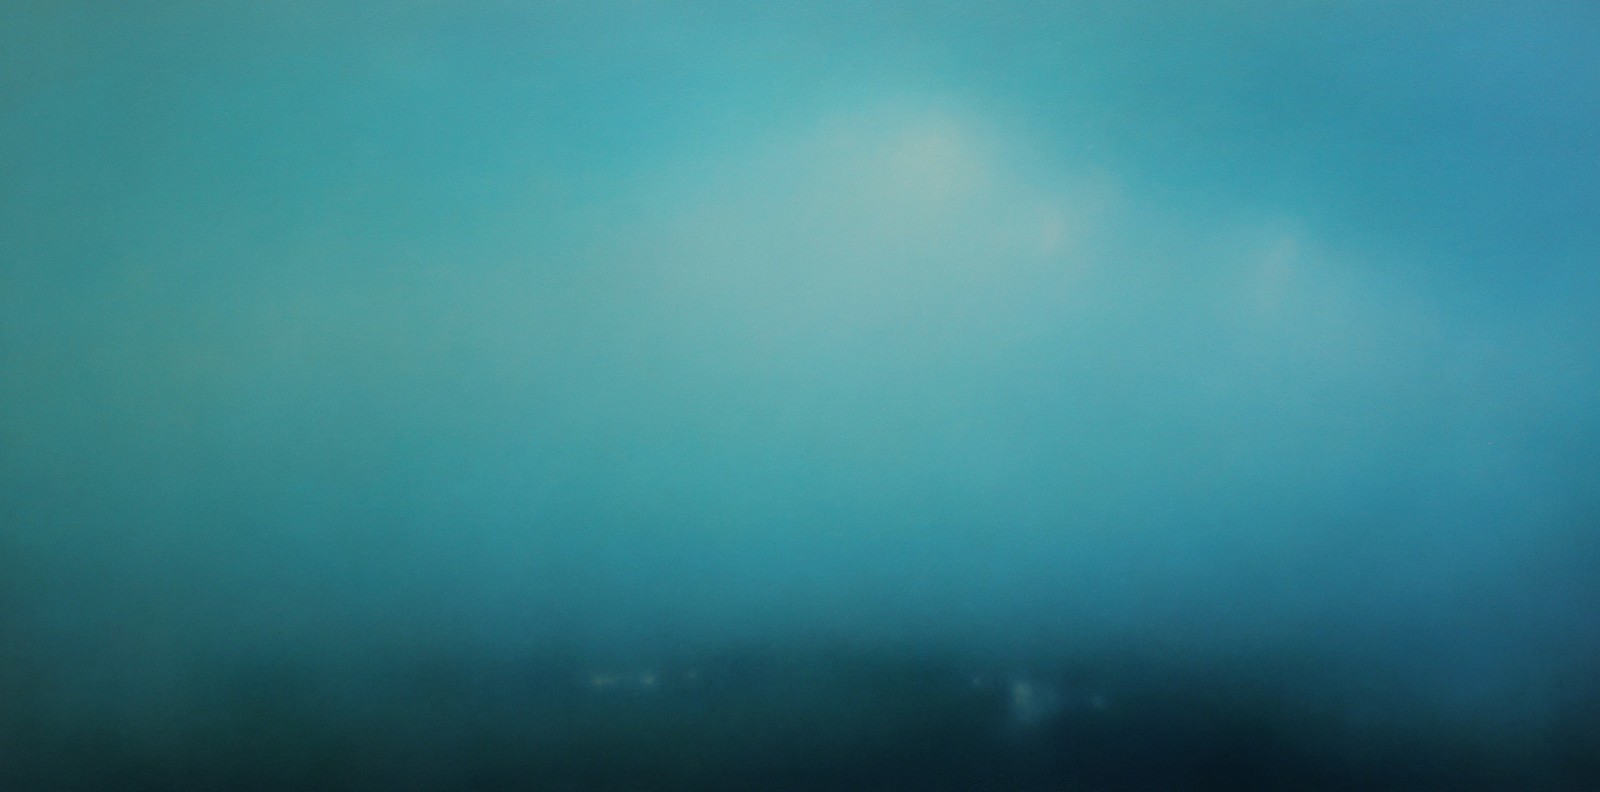 Michael Abrams
Chasing Radiance
ABR383
oil on panel, 46 x 93 inches